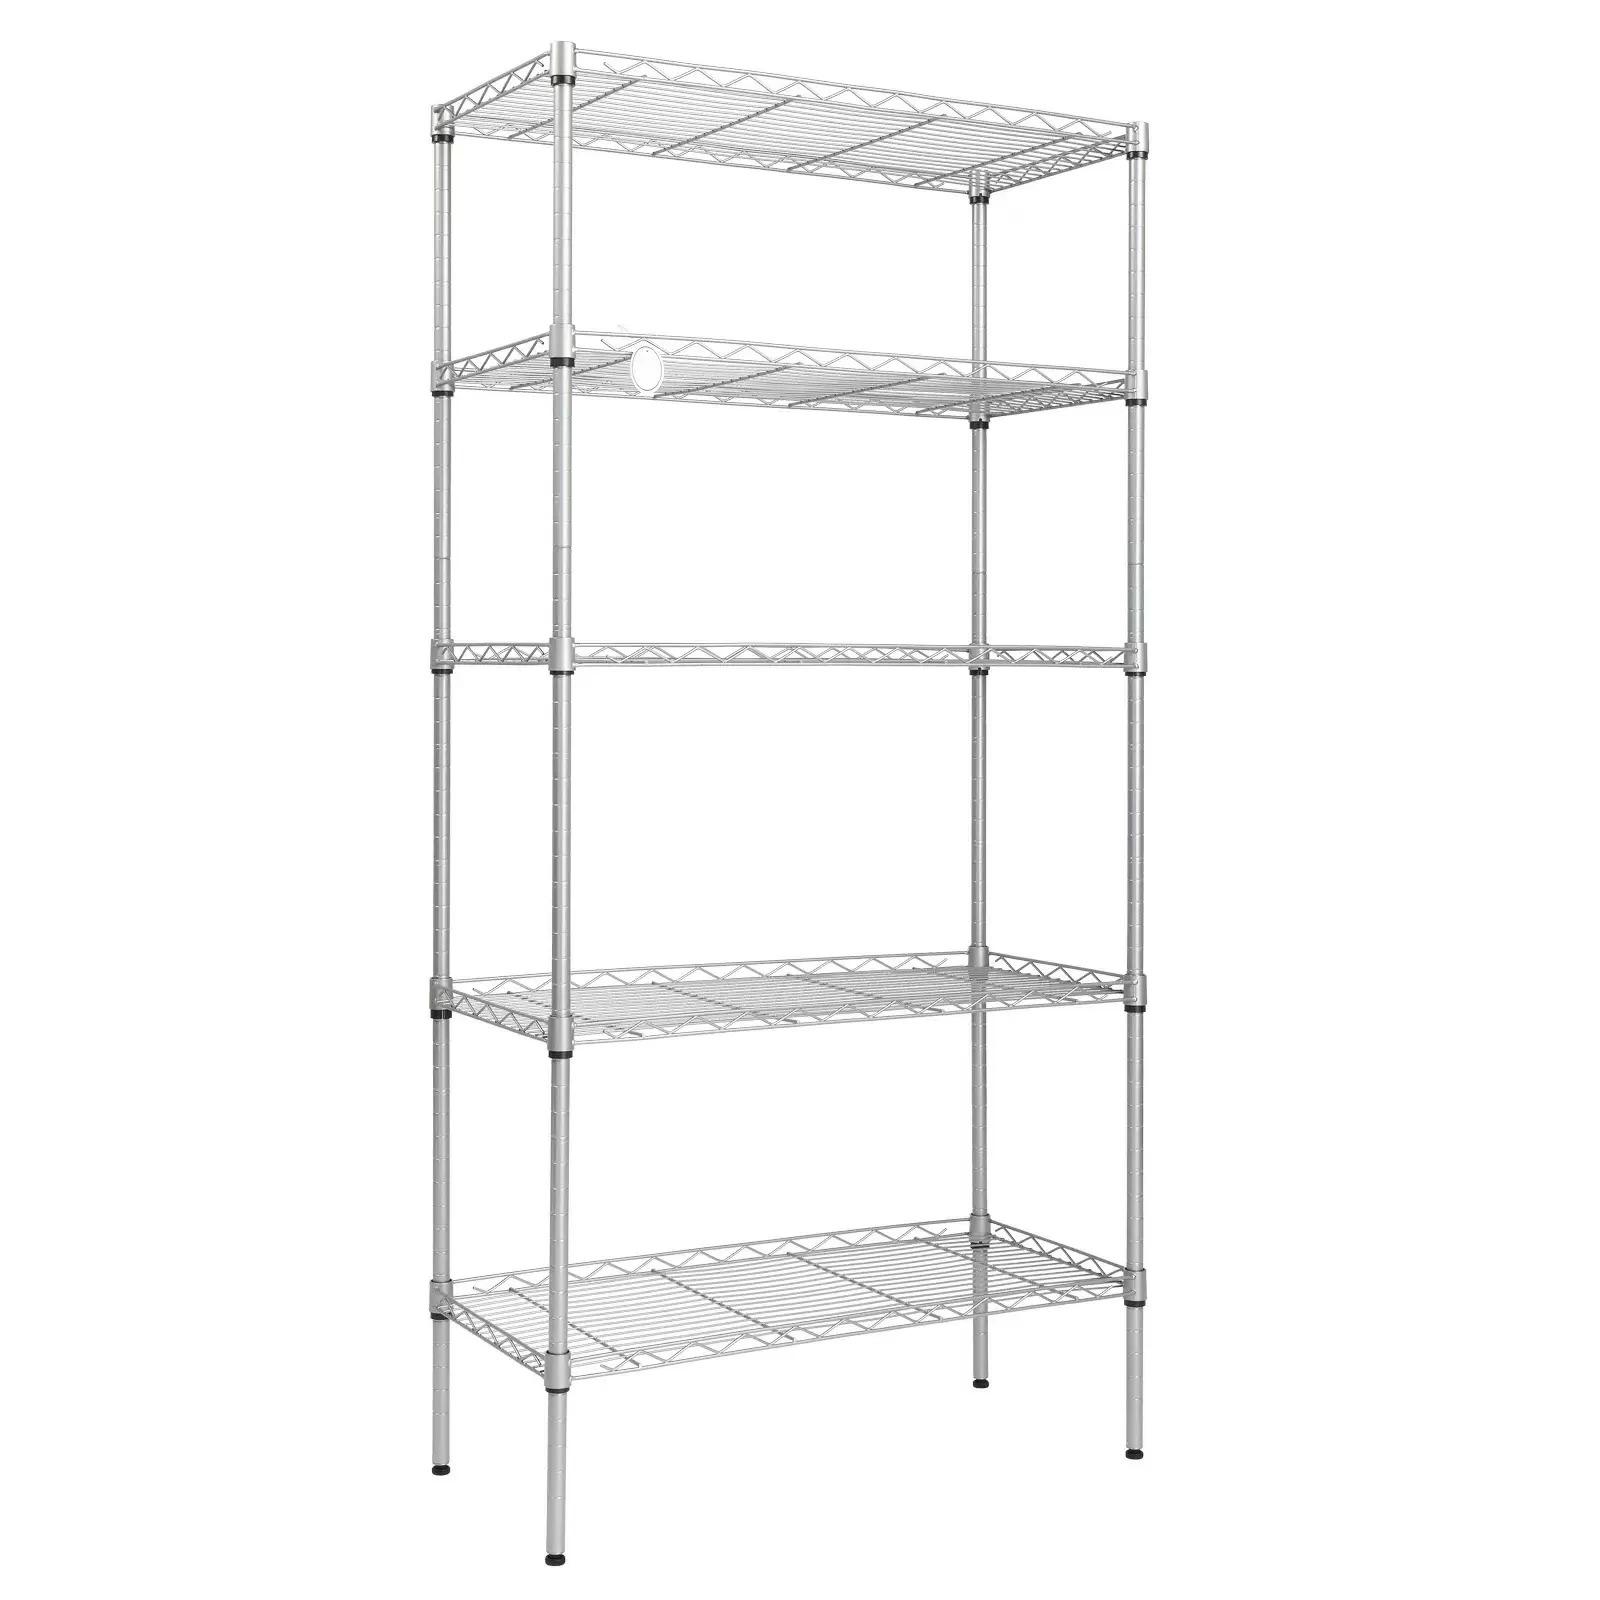 Ktaxon 5-Tier Wire Shelving Unit for $39.99 Shipped